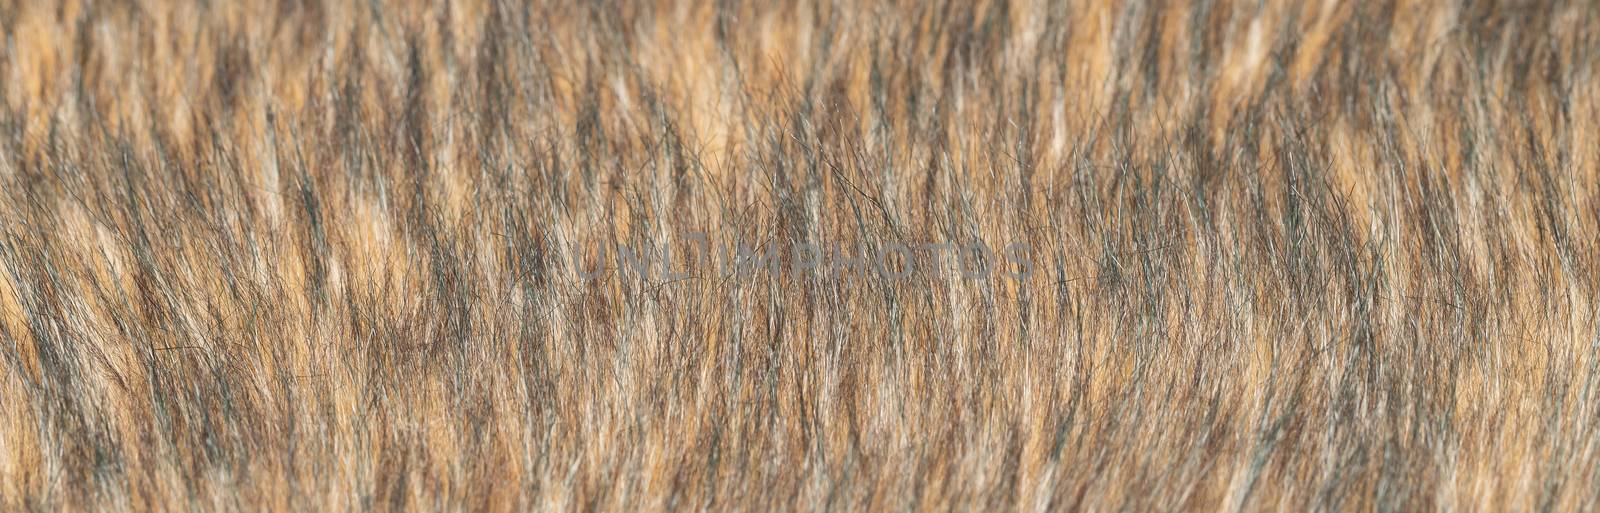 Close-up of a fluffy dark brown faux fur fabric with a background texture. by bonilook